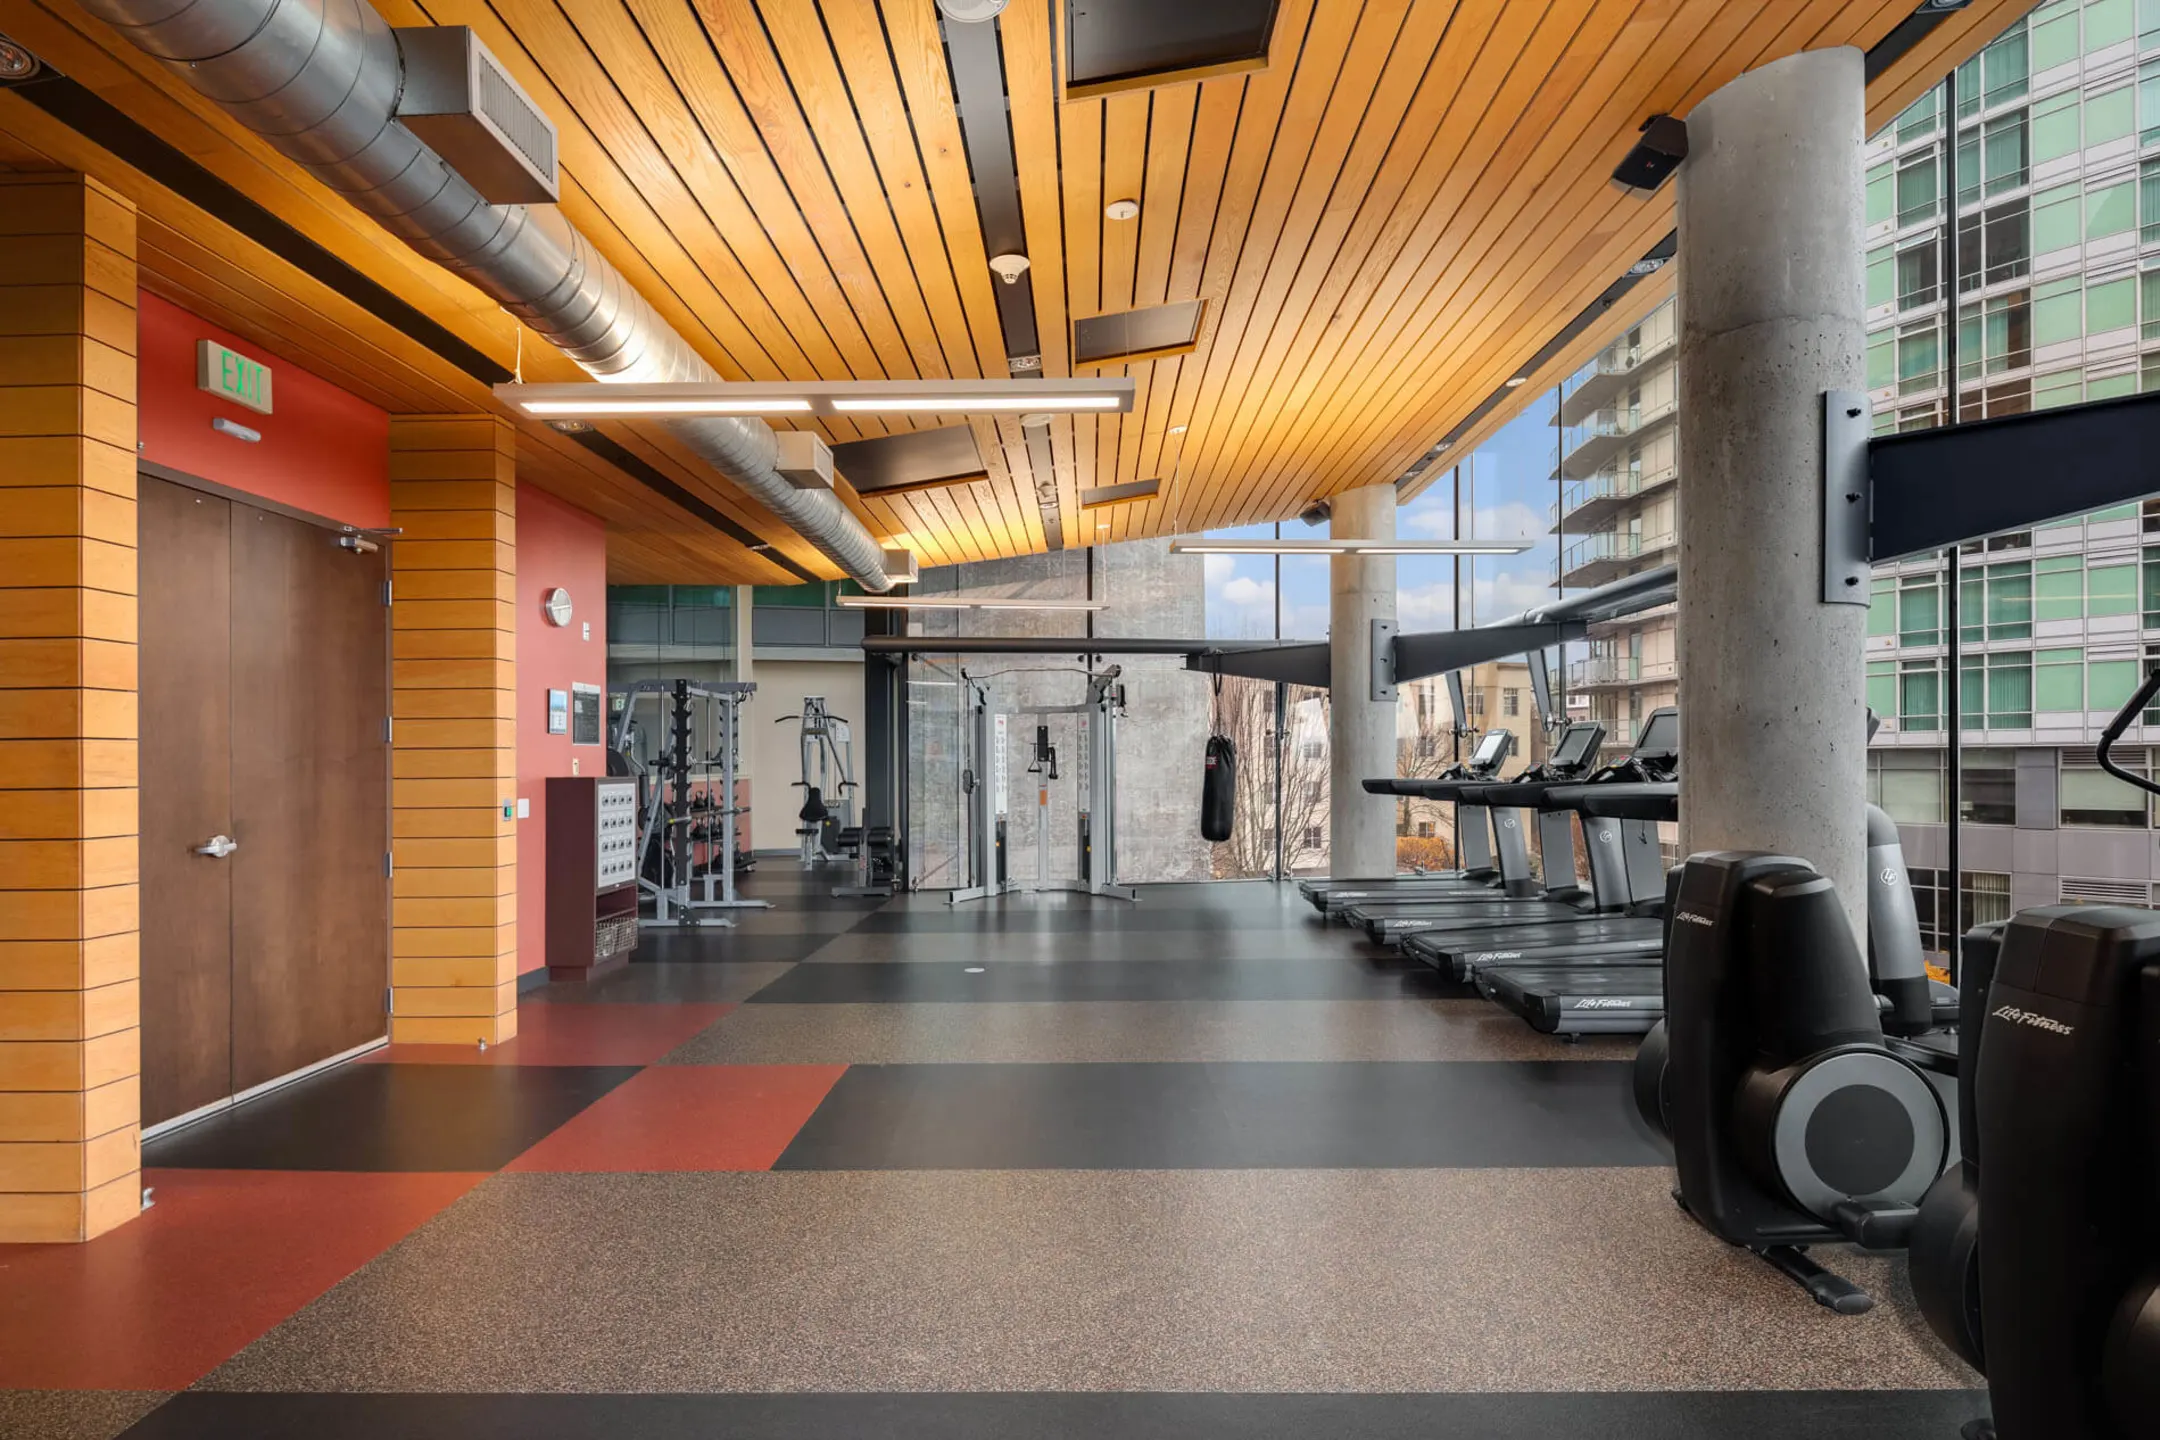 Fitness Weight Room - Elements Apartments - Bellevue, WA